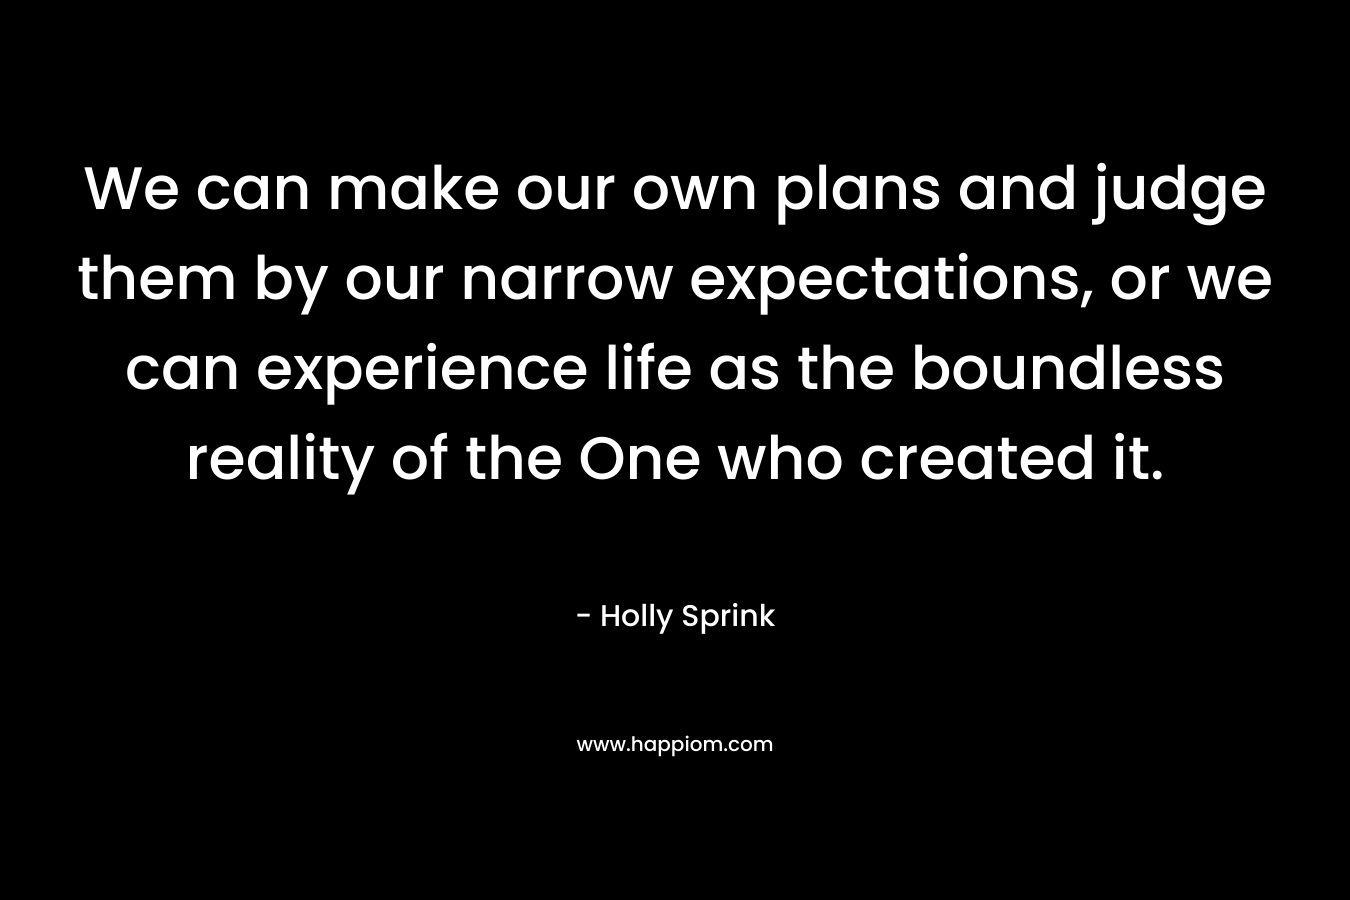 We can make our own plans and judge them by our narrow expectations, or we can experience life as the boundless reality of the One who created it. – Holly Sprink